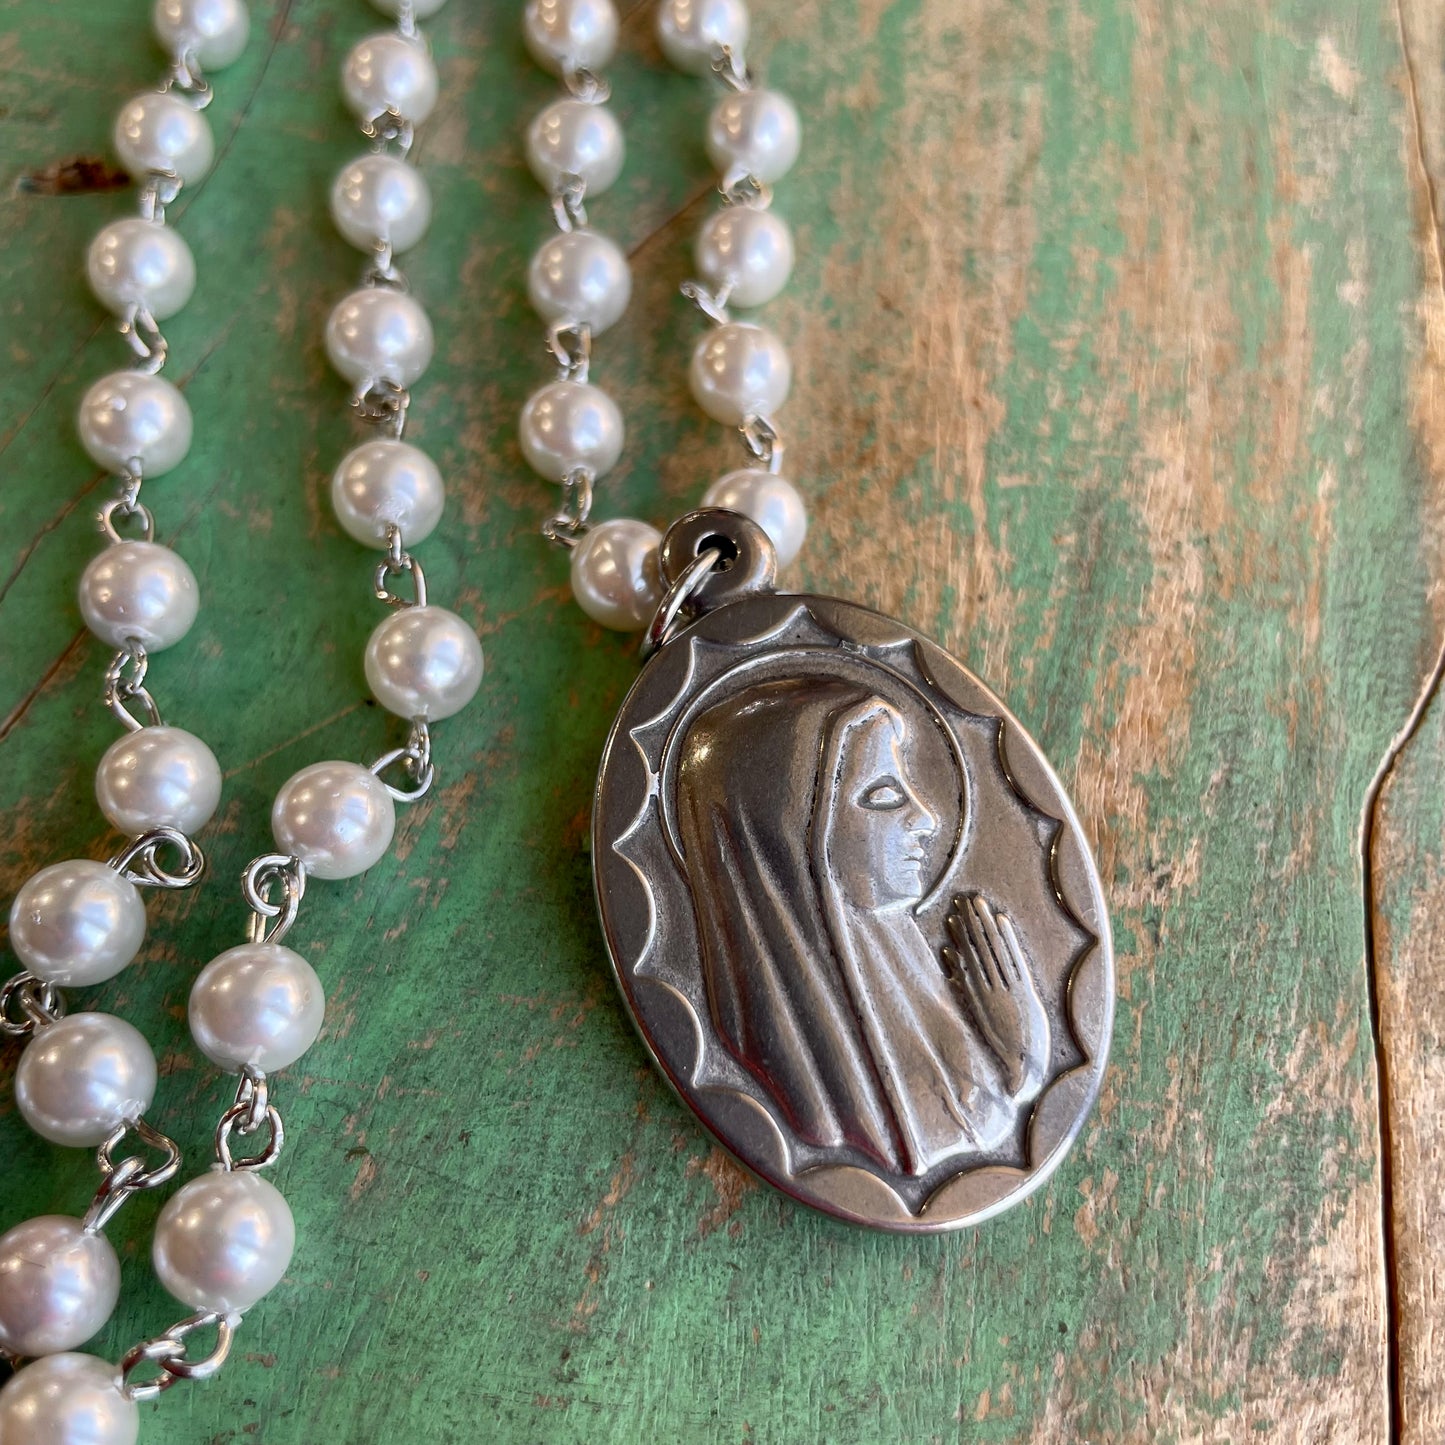 Our Lady of Fatima Pearl Necklace